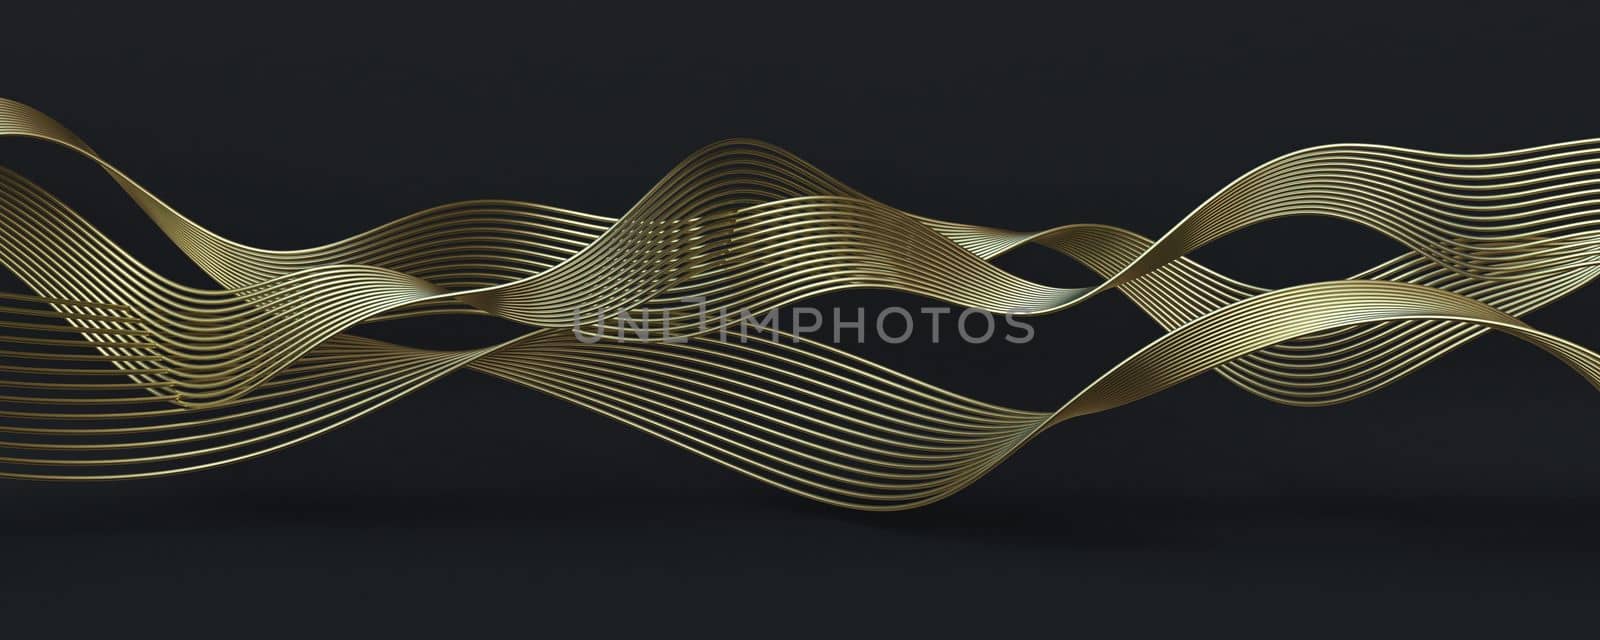 Golden wire abstract background 3D rendering illustration isolated on black background